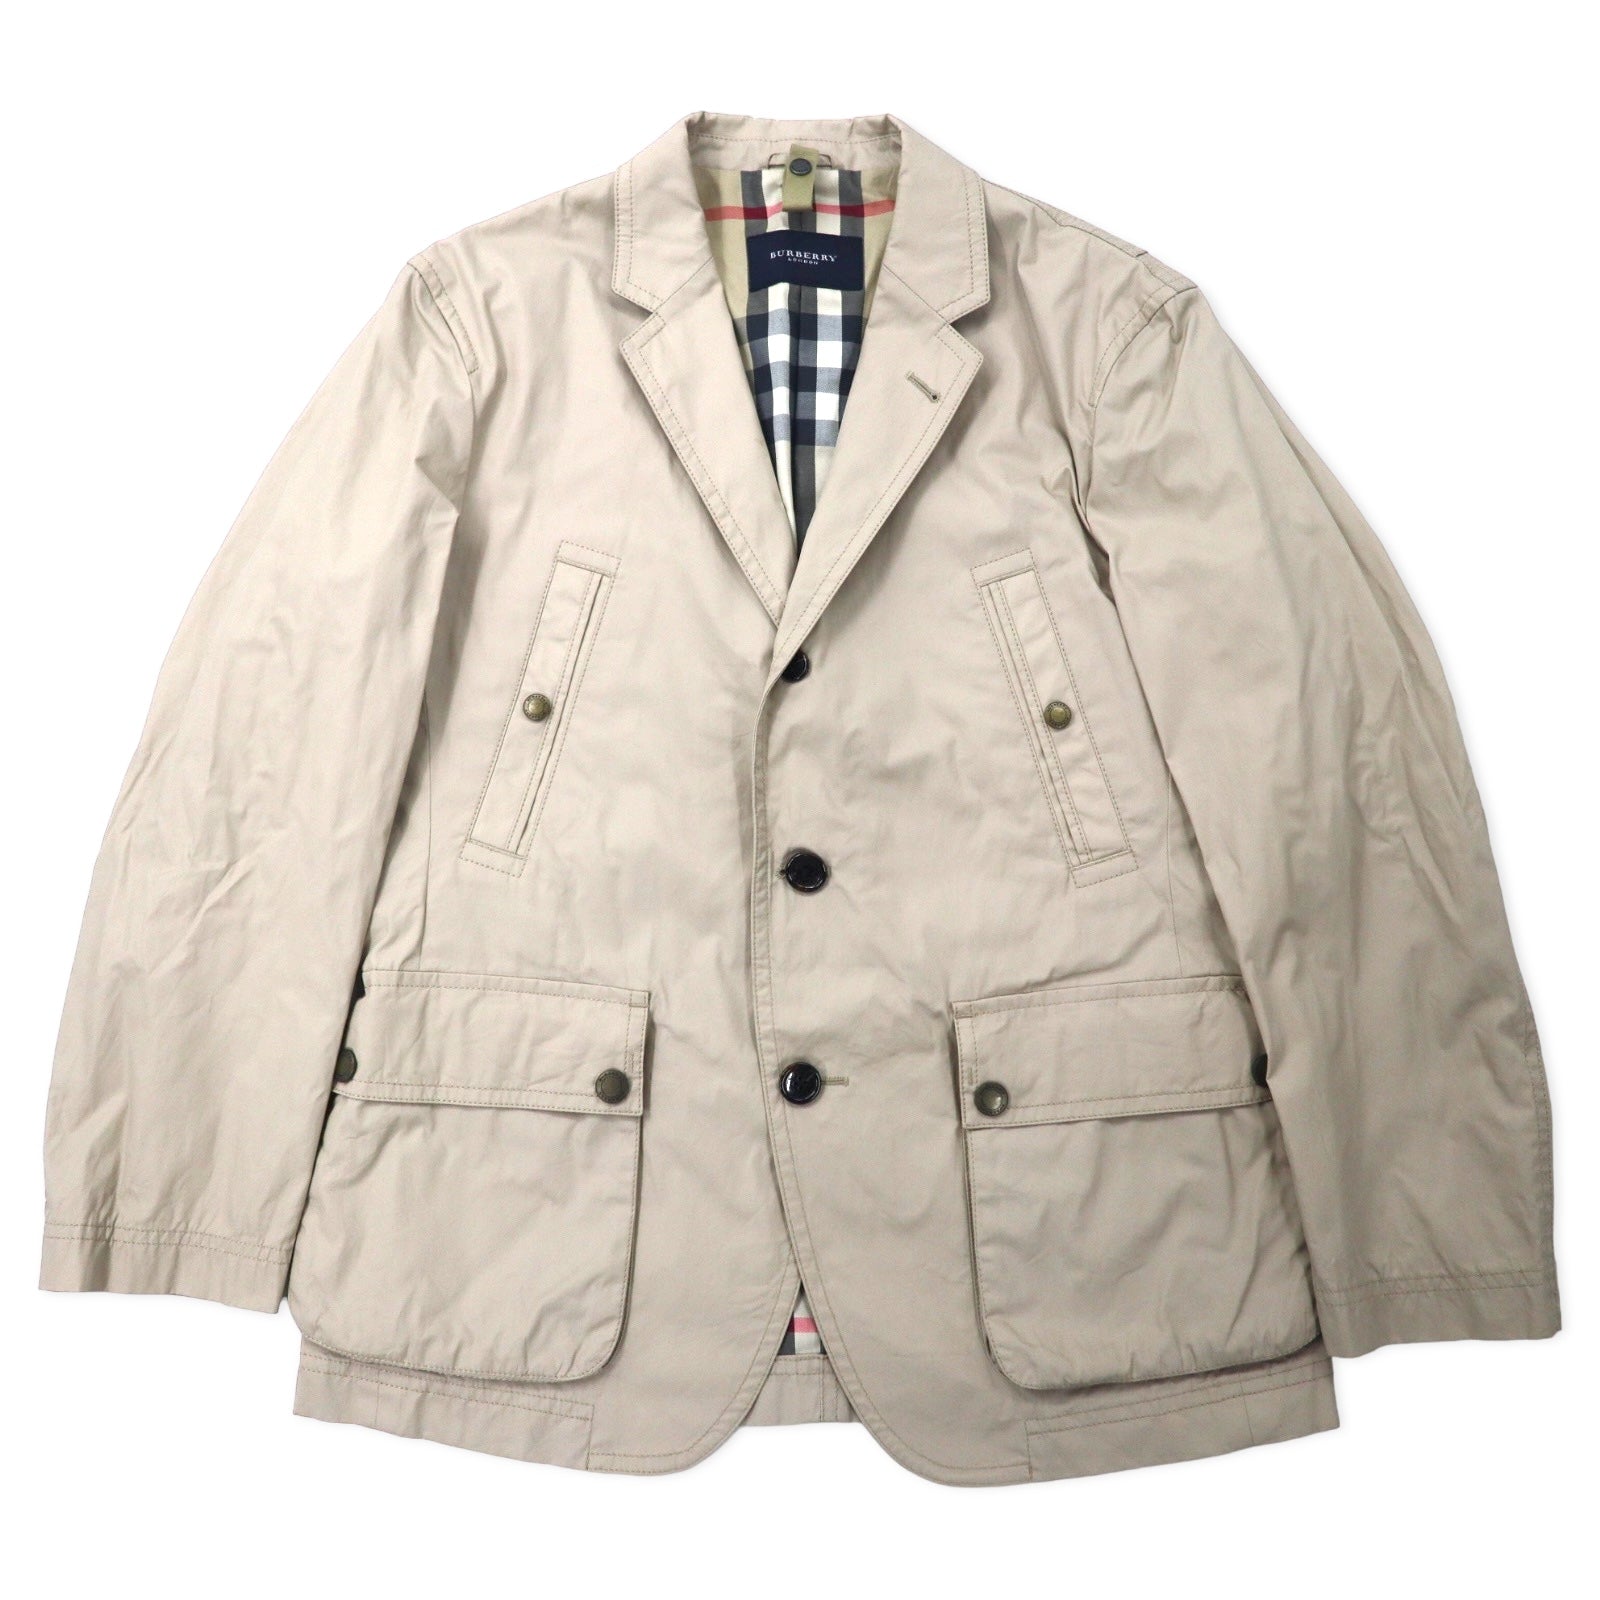 Burberry 3b Tailored Jacket Lining CHECKED M beige cotton acrylic 